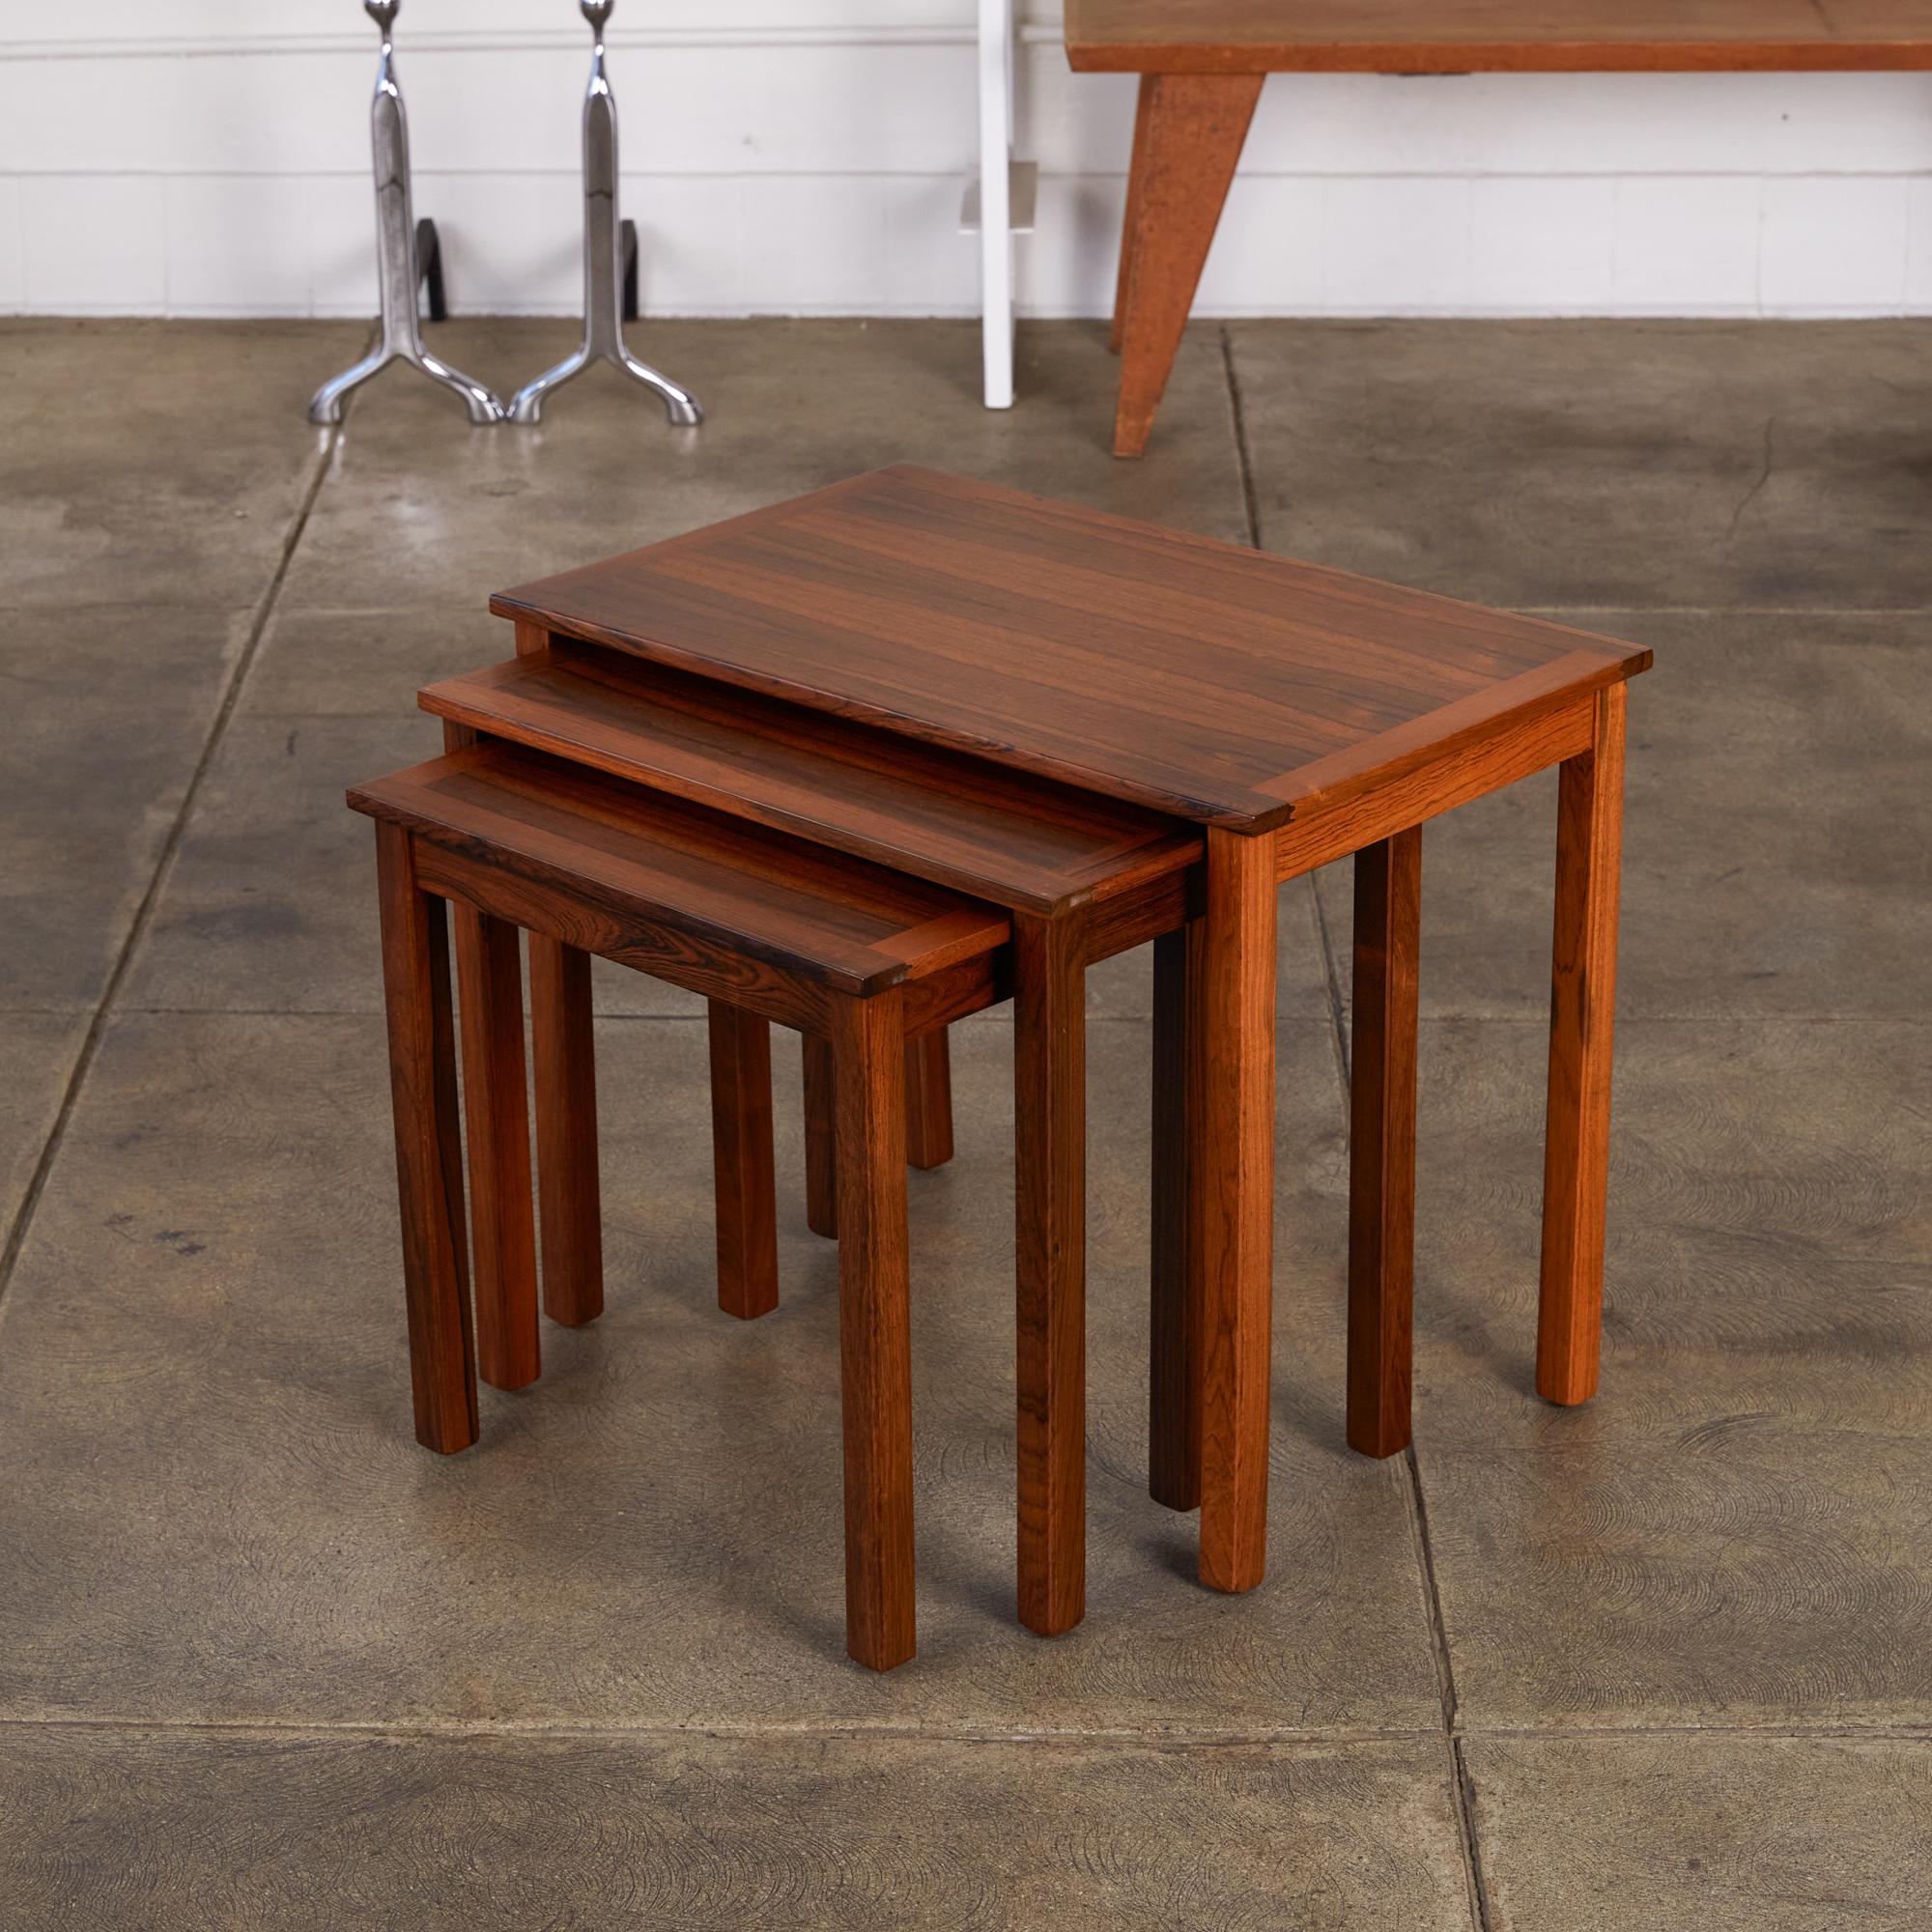 A set of Danish nesting tables in rosewood. Table design has square, slightly recessed legs, and a tabletop beautifully edged with contrasting wood grain. A set of concealed, parallel runners allows each smaller table to slide easily under the